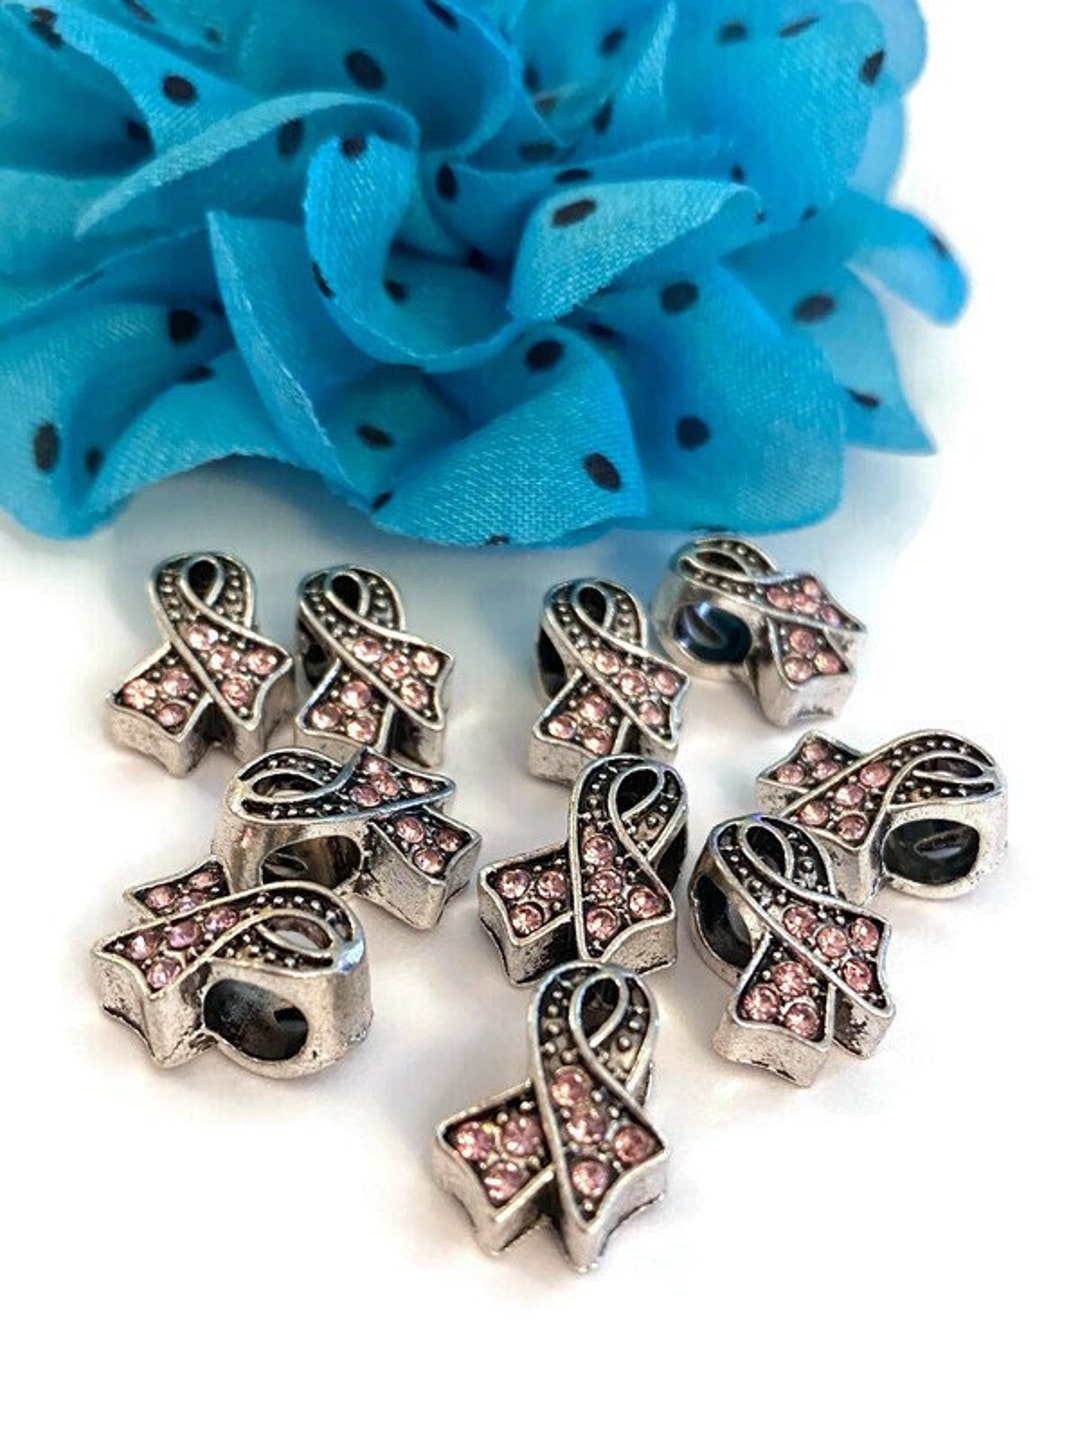 NVENF 20PCS Pink Ribbon Charms Breast Cancer Awareness Beads Charms for  Jewelry Making, Pink Enamel Rhinestone Pendants for Bracelet Necklace  Earrings